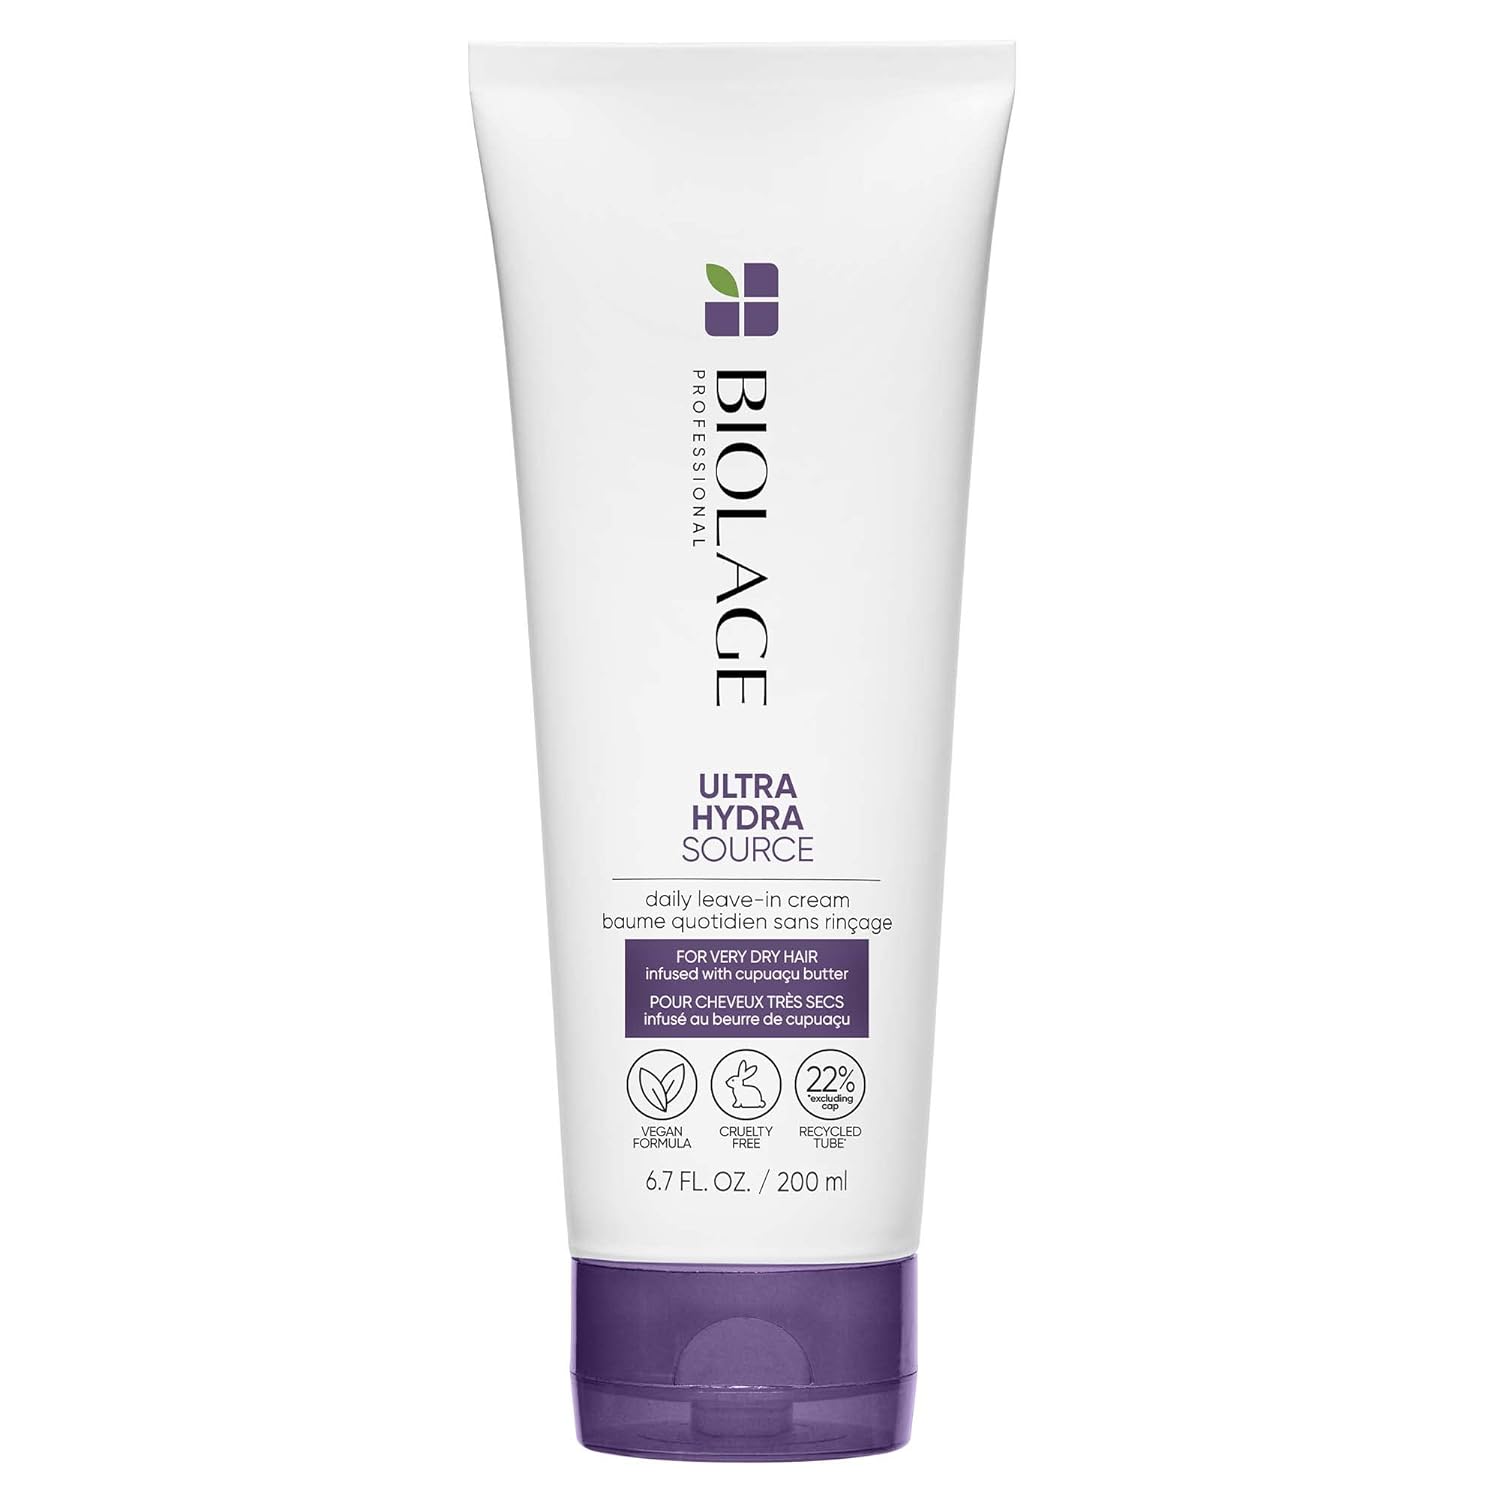 Biolage Ultra Hydra Source Leave-in Cream with Cupuacu Butter | Conditions & Softens Hair | For Very Dry Hair | Vegan | Silicone & Paraben Free | Cruelty Free | 6.7 Fl. Oz